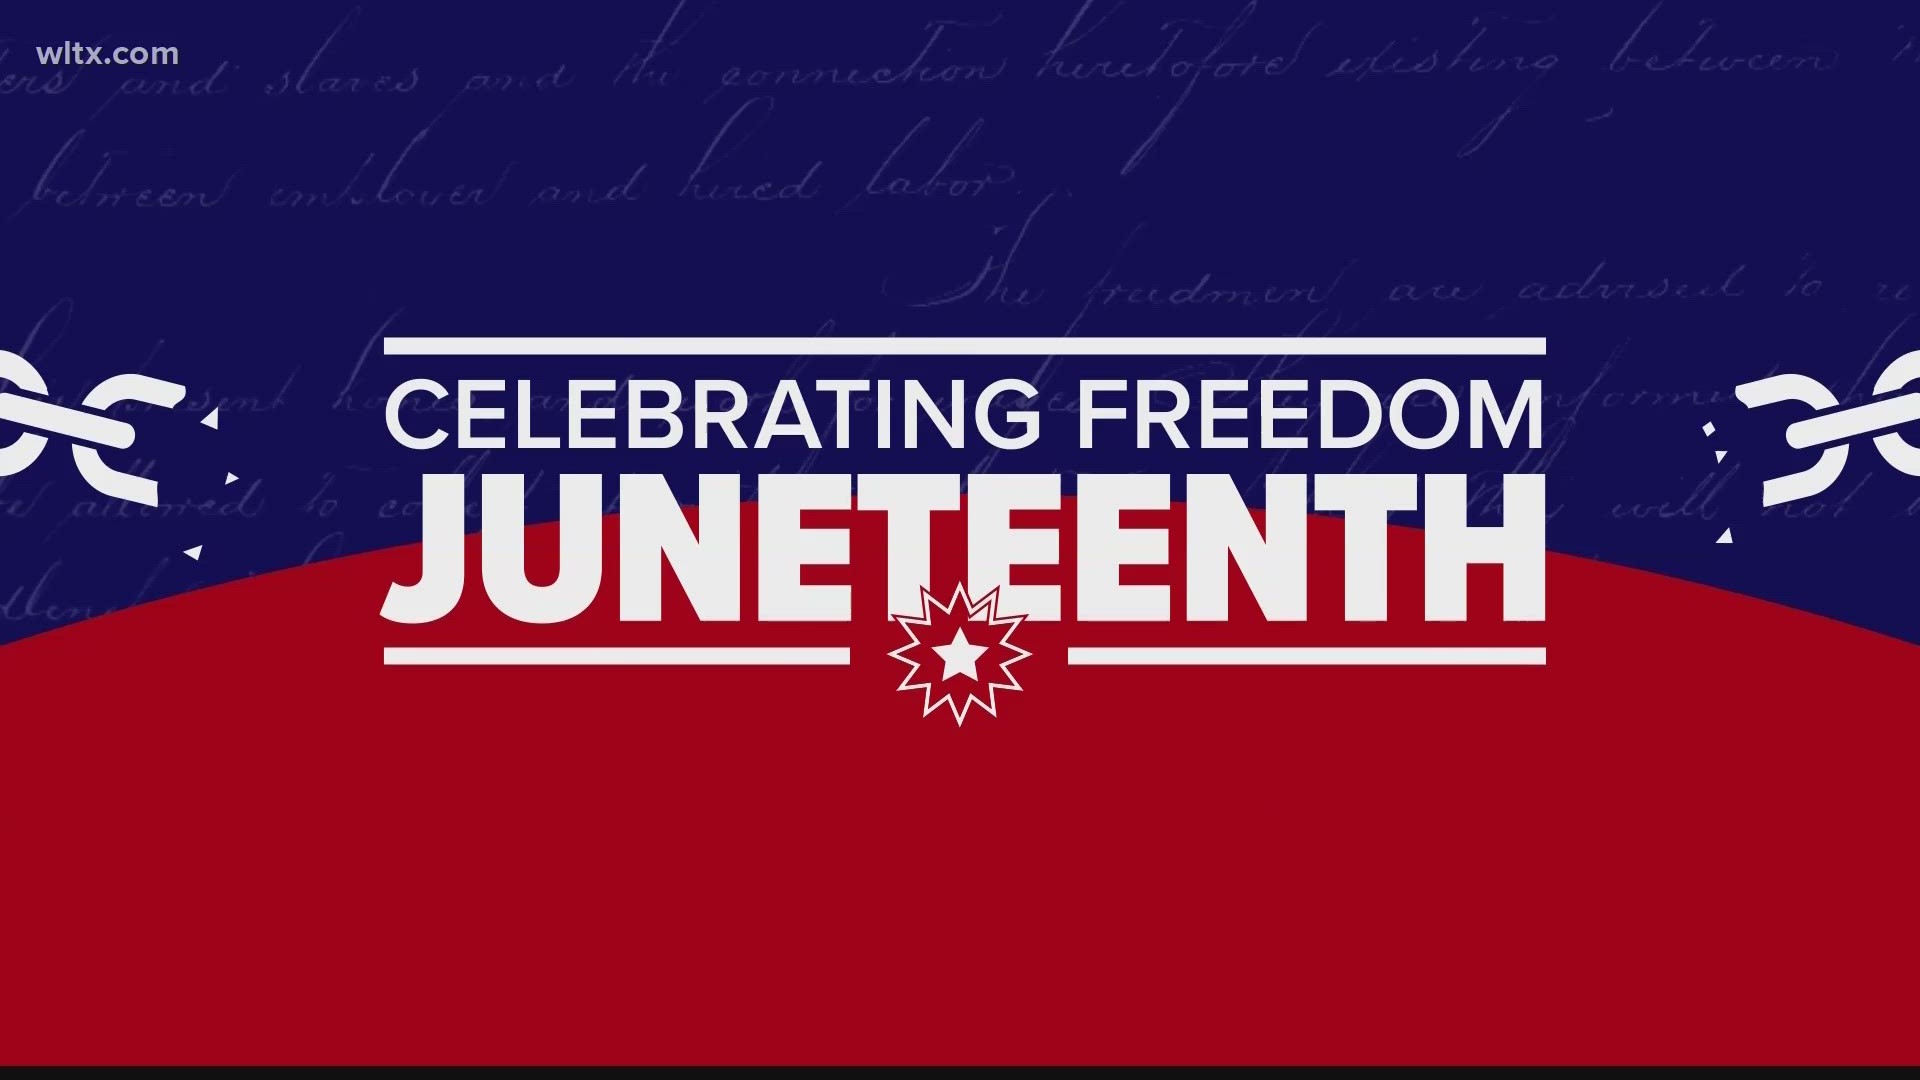 Juneteenth celebrates the date when enslaved people in Galveston, Texas first learned about the end of the Civil War and the end of slavery.